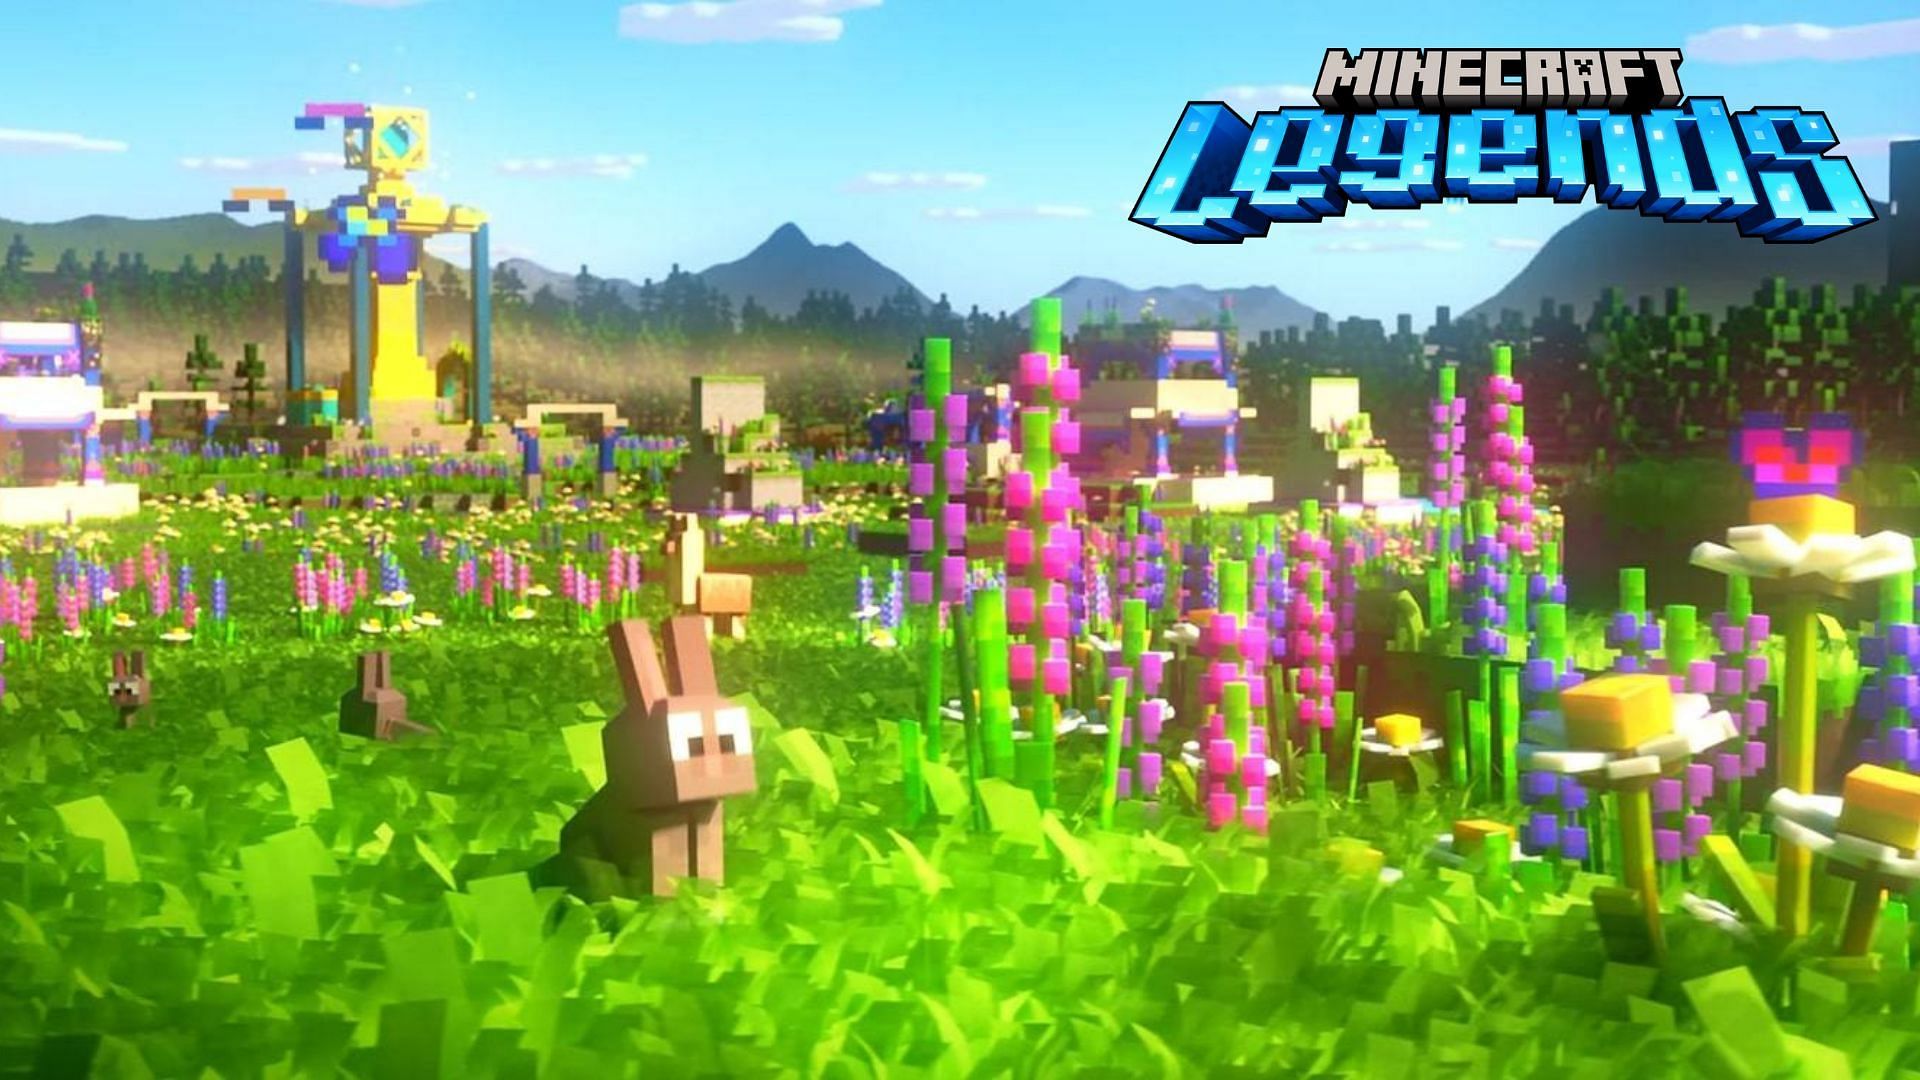 Minecraft Legends: New features, aspects, and gameplay footage showcased at Live 2022